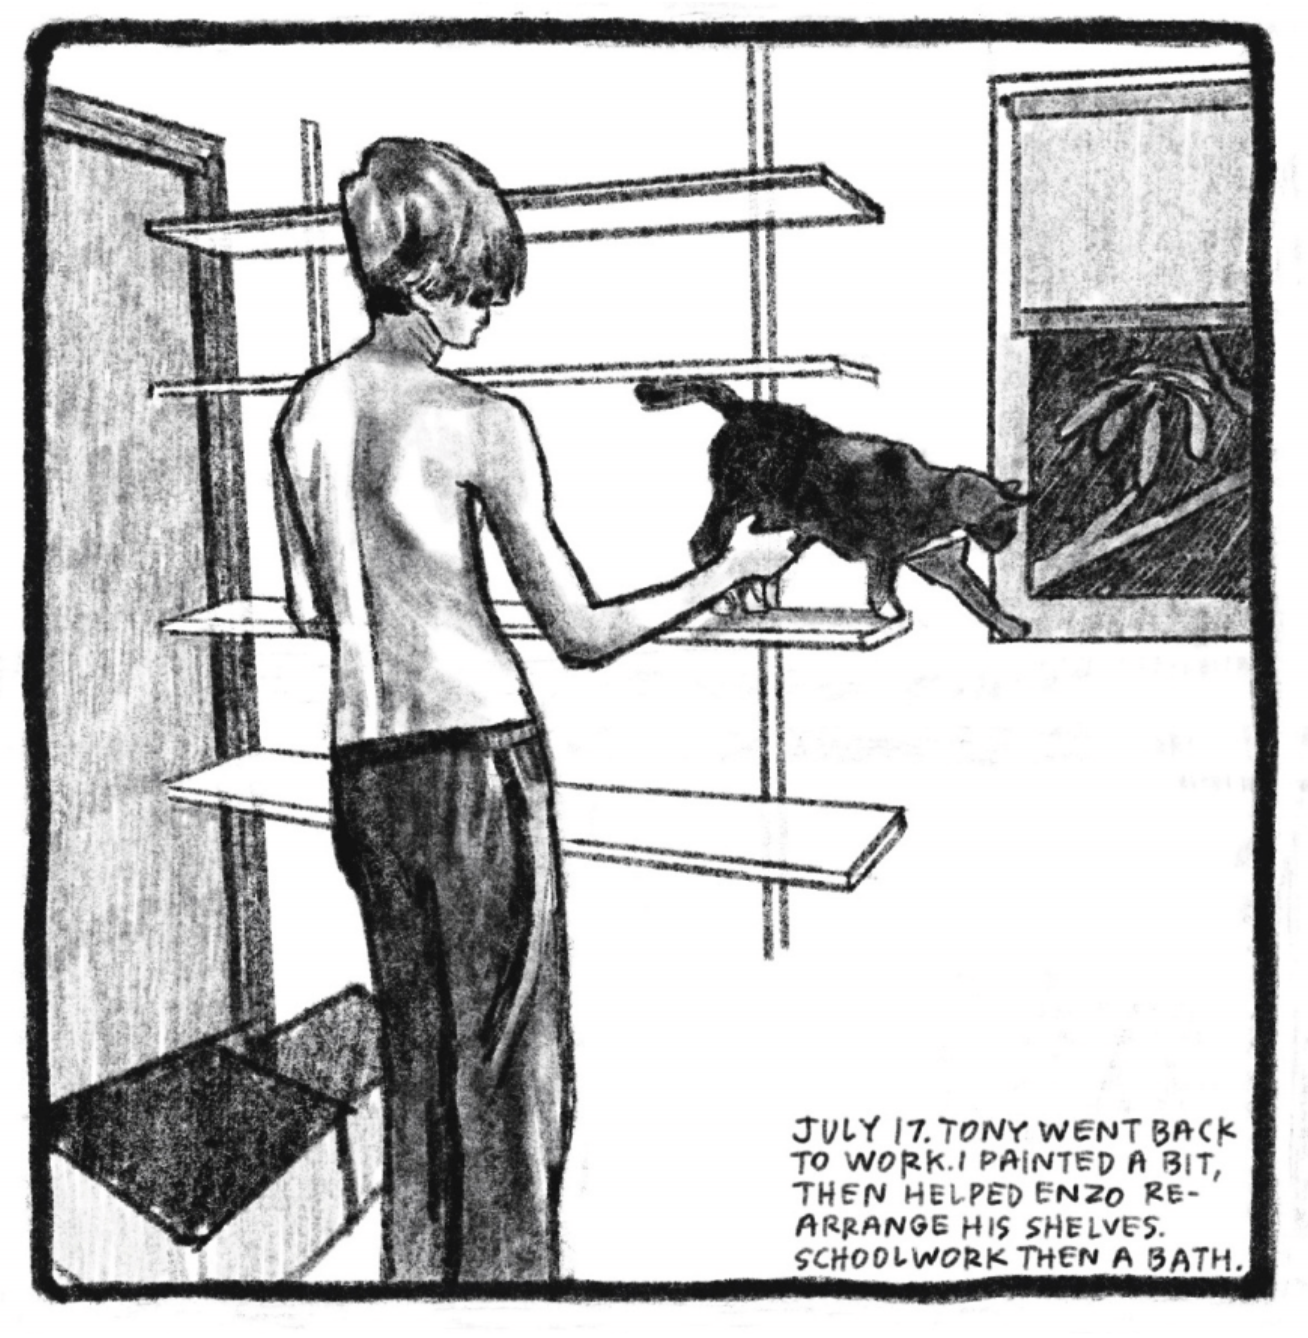 4. Enzo stands in front of four floating shelves mounted on the wall. They are empty, except for the family cat, who is trying to walk from the middle shelf to the window. Enzoâ€™s hand holds or brushes the catâ€™s leg. He is shirtless and wearing sweatpants. There is an empty box on the floor to his left. â€œJuly 17. Tony went back to work. I painted a bit, then helped Enzo rearrange his shelves. Schoolwork then a bath.â€